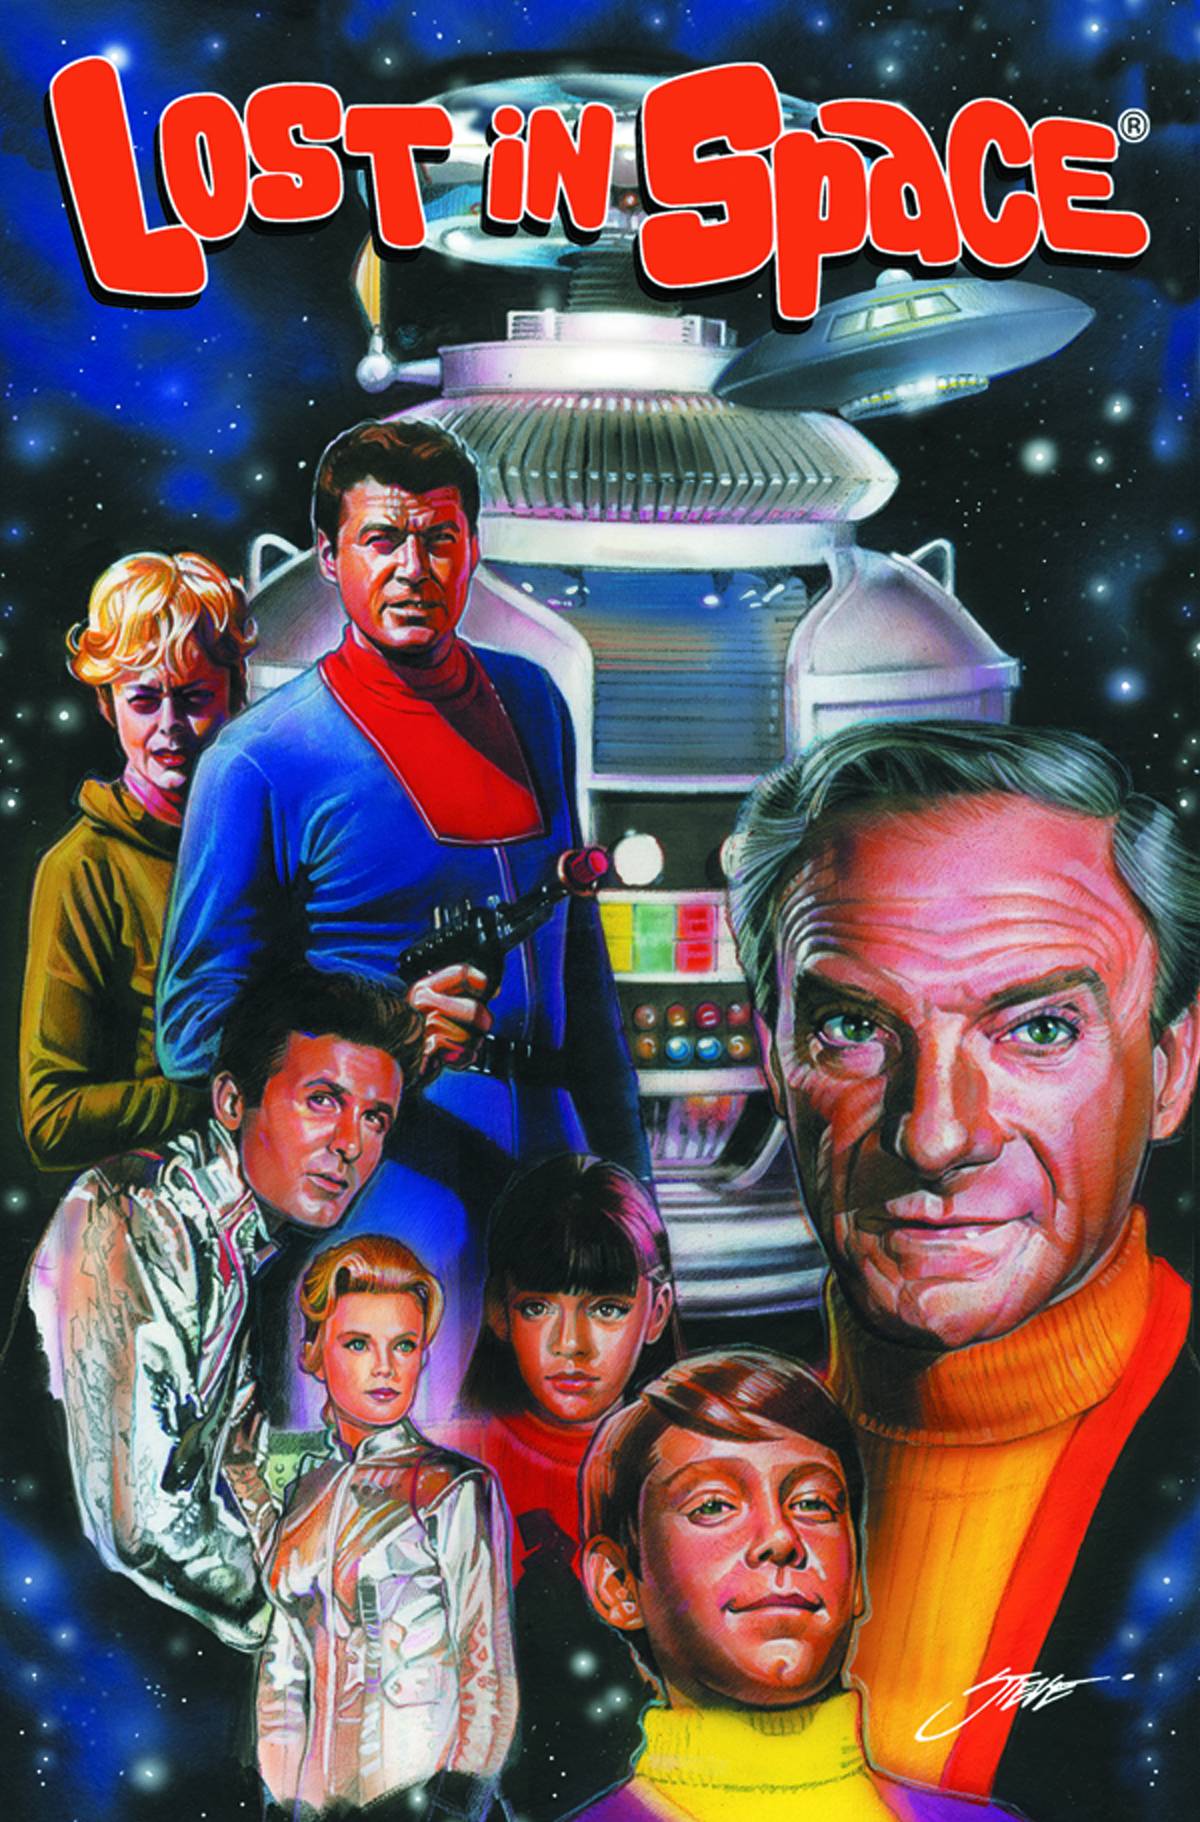 Lost in Space #1 Cover A Stanley